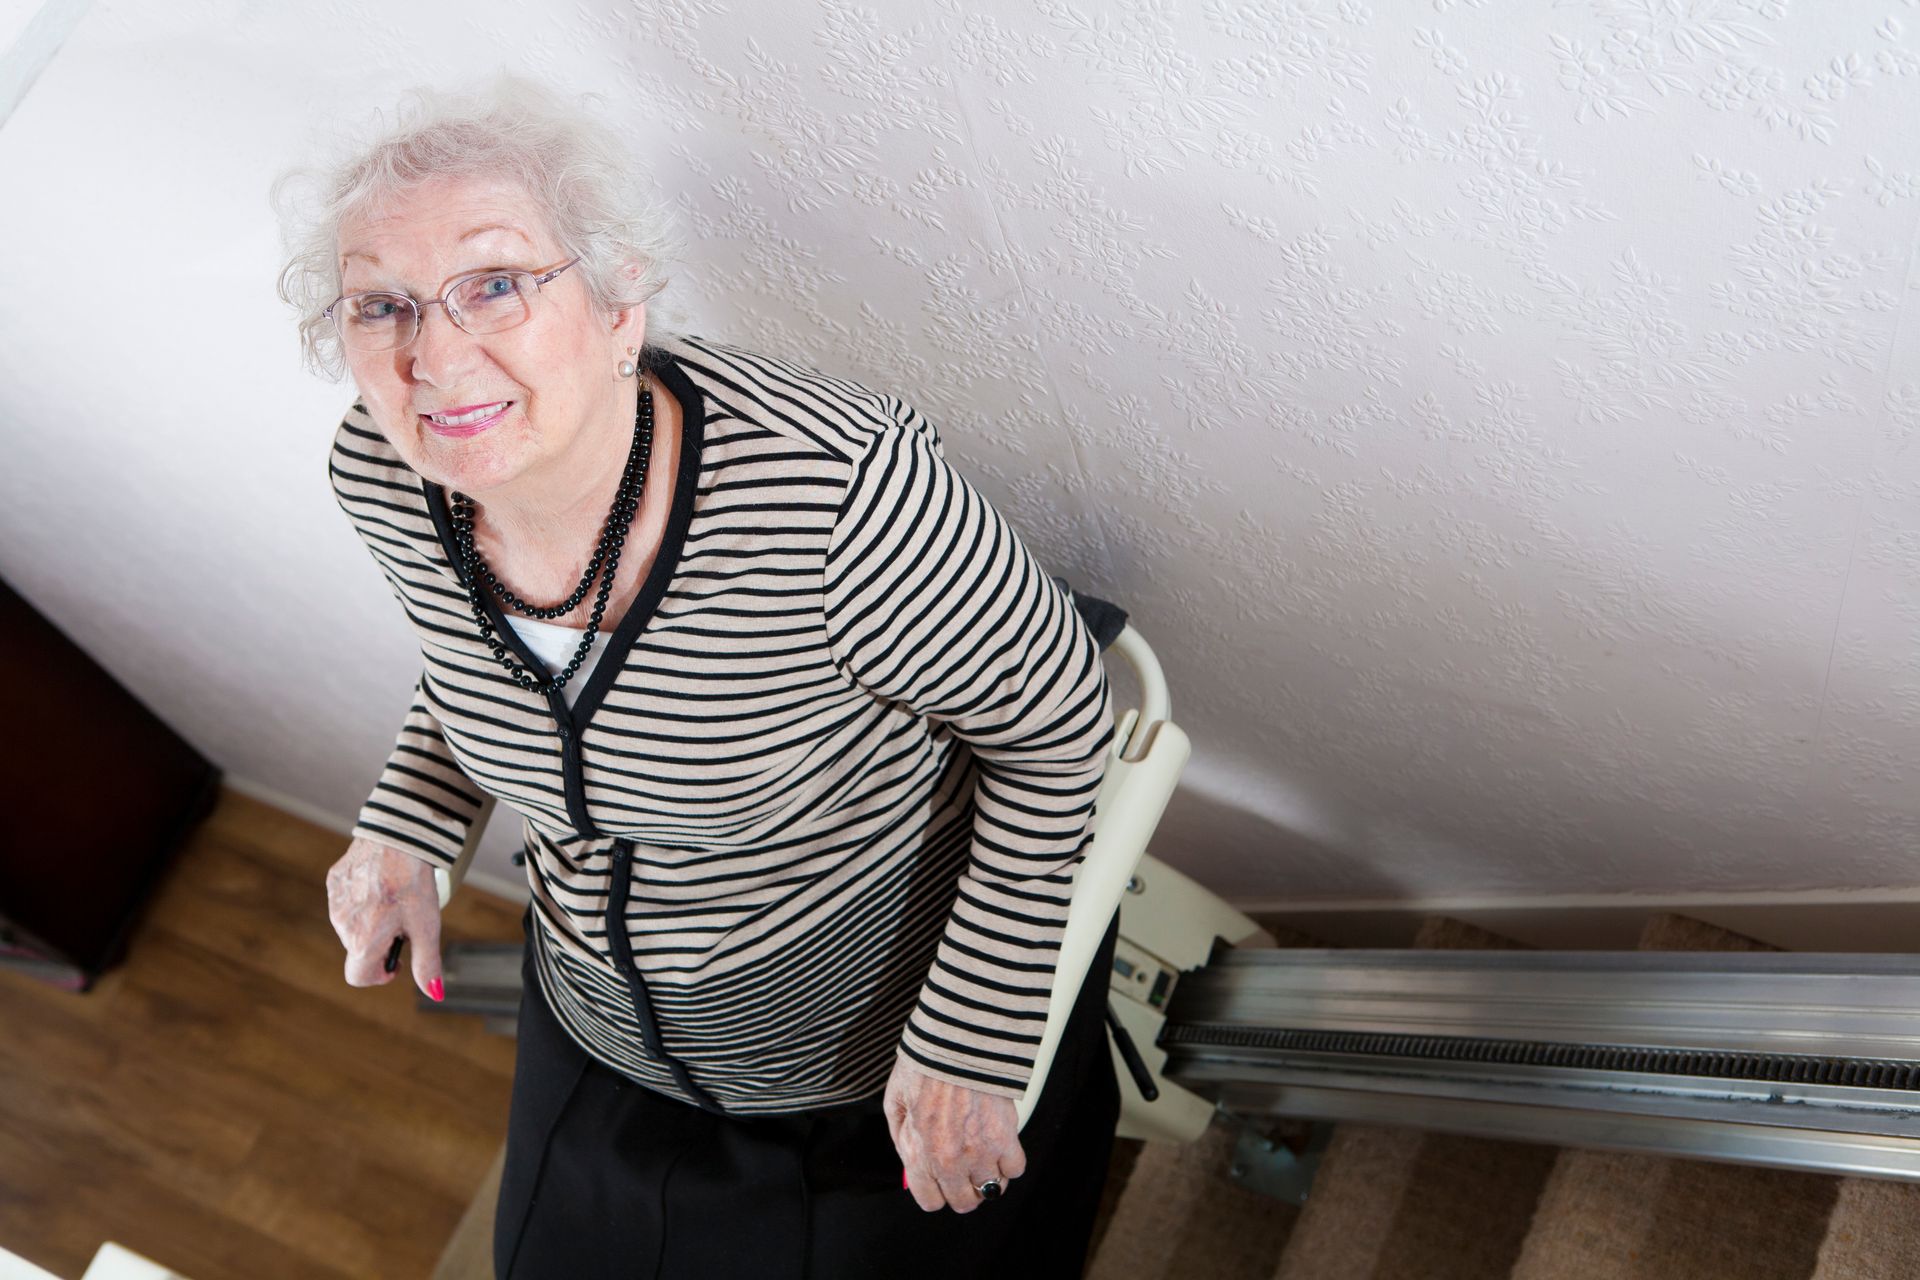  An older woman smiles as she rides a stair lift, one of the home modifications that help her stay s